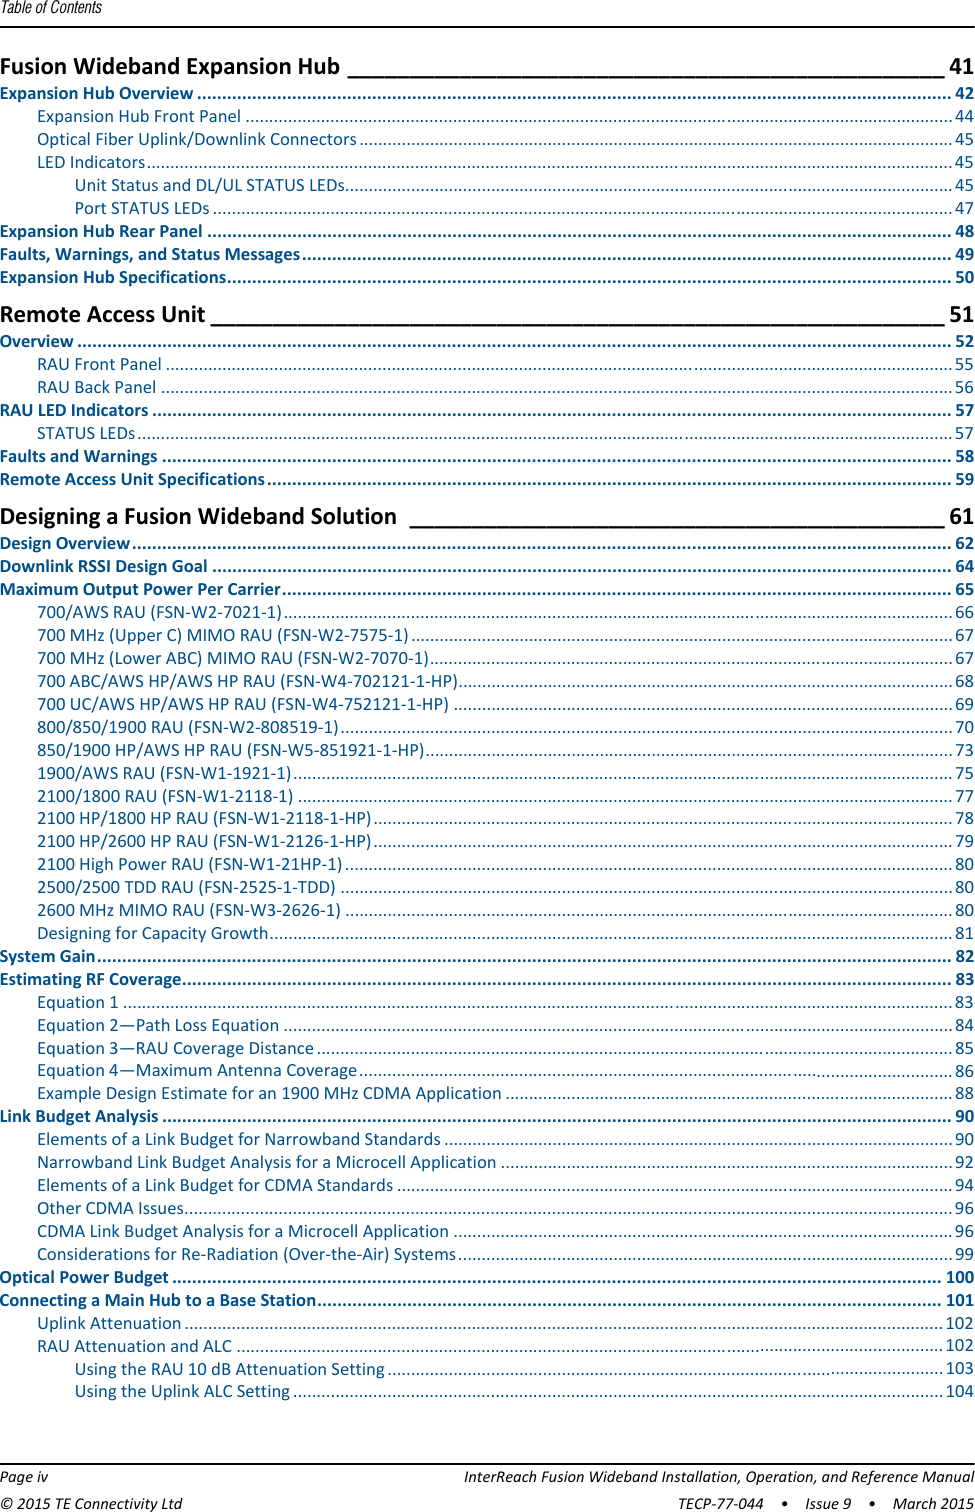 Table of Contents  Page iv InterReach Fusion Wideband Installation, Operation, and Reference Manual© 2015 TE Connectivity Ltd TECP-77-044  •  Issue 9  •  March 2015Fusion Wideband Expansion Hub ________________________________________________ 41Expansion Hub Overview ....................................................................................................................................................... 42Expansion Hub Front Panel ......................................................................................................................................................44Optical Fiber Uplink/Downlink Connectors.............................................................................................................................. 45LED Indicators........................................................................................................................................................................... 45Unit Status and DL/UL STATUS LEDs................................................................................................................................. 45Port STATUS LEDs ............................................................................................................................................................. 47Expansion Hub Rear Panel ..................................................................................................................................................... 48Faults, Warnings, and Status Messages.................................................................................................................................. 49Expansion Hub Specifications................................................................................................................................................. 50Remote Access Unit ___________________________________________________________ 51Overview ............................................................................................................................................................................... 52RAU Front Panel ....................................................................................................................................................................... 55RAU Back Panel ........................................................................................................................................................................ 56RAU LED Indicators ................................................................................................................................................................ 57STATUS LEDs............................................................................................................................................................................. 57Faults and Warnings .............................................................................................................................................................. 58Remote Access Unit Specifications......................................................................................................................................... 59Designing a Fusion Wideband Solution ___________________________________________ 61Design Overview.................................................................................................................................................................... 62Downlink RSSI Design Goal .................................................................................................................................................... 64Maximum Output Power Per Carrier...................................................................................................................................... 65700/AWS RAU (FSN-W2-7021-1)..............................................................................................................................................66700 MHz (Upper C) MIMO RAU (FSN-W2-7575-1) ................................................................................................................... 67700 MHz (Lower ABC) MIMO RAU (FSN-W2-7070-1)............................................................................................................... 67700 ABC/AWS HP/AWS HP RAU (FSN-W4-702121-1-HP)......................................................................................................... 68700 UC/AWS HP/AWS HP RAU (FSN-W4-752121-1-HP) .......................................................................................................... 69800/850/1900 RAU (FSN-W2-808519-1)..................................................................................................................................70850/1900 HP/AWS HP RAU (FSN-W5-851921-1-HP)................................................................................................................ 731900/AWS RAU (FSN-W1-1921-1)............................................................................................................................................ 752100/1800 RAU (FSN-W1-2118-1) ........................................................................................................................................... 772100 HP/1800 HP RAU (FSN-W1-2118-1-HP)........................................................................................................................... 782100 HP/2600 HP RAU (FSN-W1-2126-1-HP)........................................................................................................................... 792100 High Power RAU (FSN-W1-21HP-1) ................................................................................................................................. 802500/2500 TDD RAU (FSN-2525-1-TDD) ..................................................................................................................................802600 MHz MIMO RAU (FSN-W3-2626-1) ................................................................................................................................. 80Designing for Capacity Growth................................................................................................................................................. 81System Gain........................................................................................................................................................................... 82Estimating RF Coverage.......................................................................................................................................................... 83Equation 1 ................................................................................................................................................................................ 83Equation 2—Path Loss Equation ..............................................................................................................................................84Equation 3—RAU Coverage Distance....................................................................................................................................... 85Equation 4—Maximum Antenna Coverage.............................................................................................................................. 86Example Design Estimate for an 1900 MHz CDMA Application ............................................................................................... 88Link Budget Analysis .............................................................................................................................................................. 90Elements of a Link Budget for Narrowband Standards ............................................................................................................ 90Narrowband Link Budget Analysis for a Microcell Application ................................................................................................ 92Elements of a Link Budget for CDMA Standards ...................................................................................................................... 94Other CDMA Issues................................................................................................................................................................... 96CDMA Link Budget Analysis for a Microcell Application .......................................................................................................... 96Considerations for Re-Radiation (Over-the-Air) Systems......................................................................................................... 99Optical Power Budget .......................................................................................................................................................... 100Connecting a Main Hub to a Base Station............................................................................................................................. 101Uplink Attenuation .................................................................................................................................................................102RAU Attenuation and ALC ......................................................................................................................................................102Using the RAU 10 dB Attenuation Setting ......................................................................................................................103Using the Uplink ALC Setting ..........................................................................................................................................104